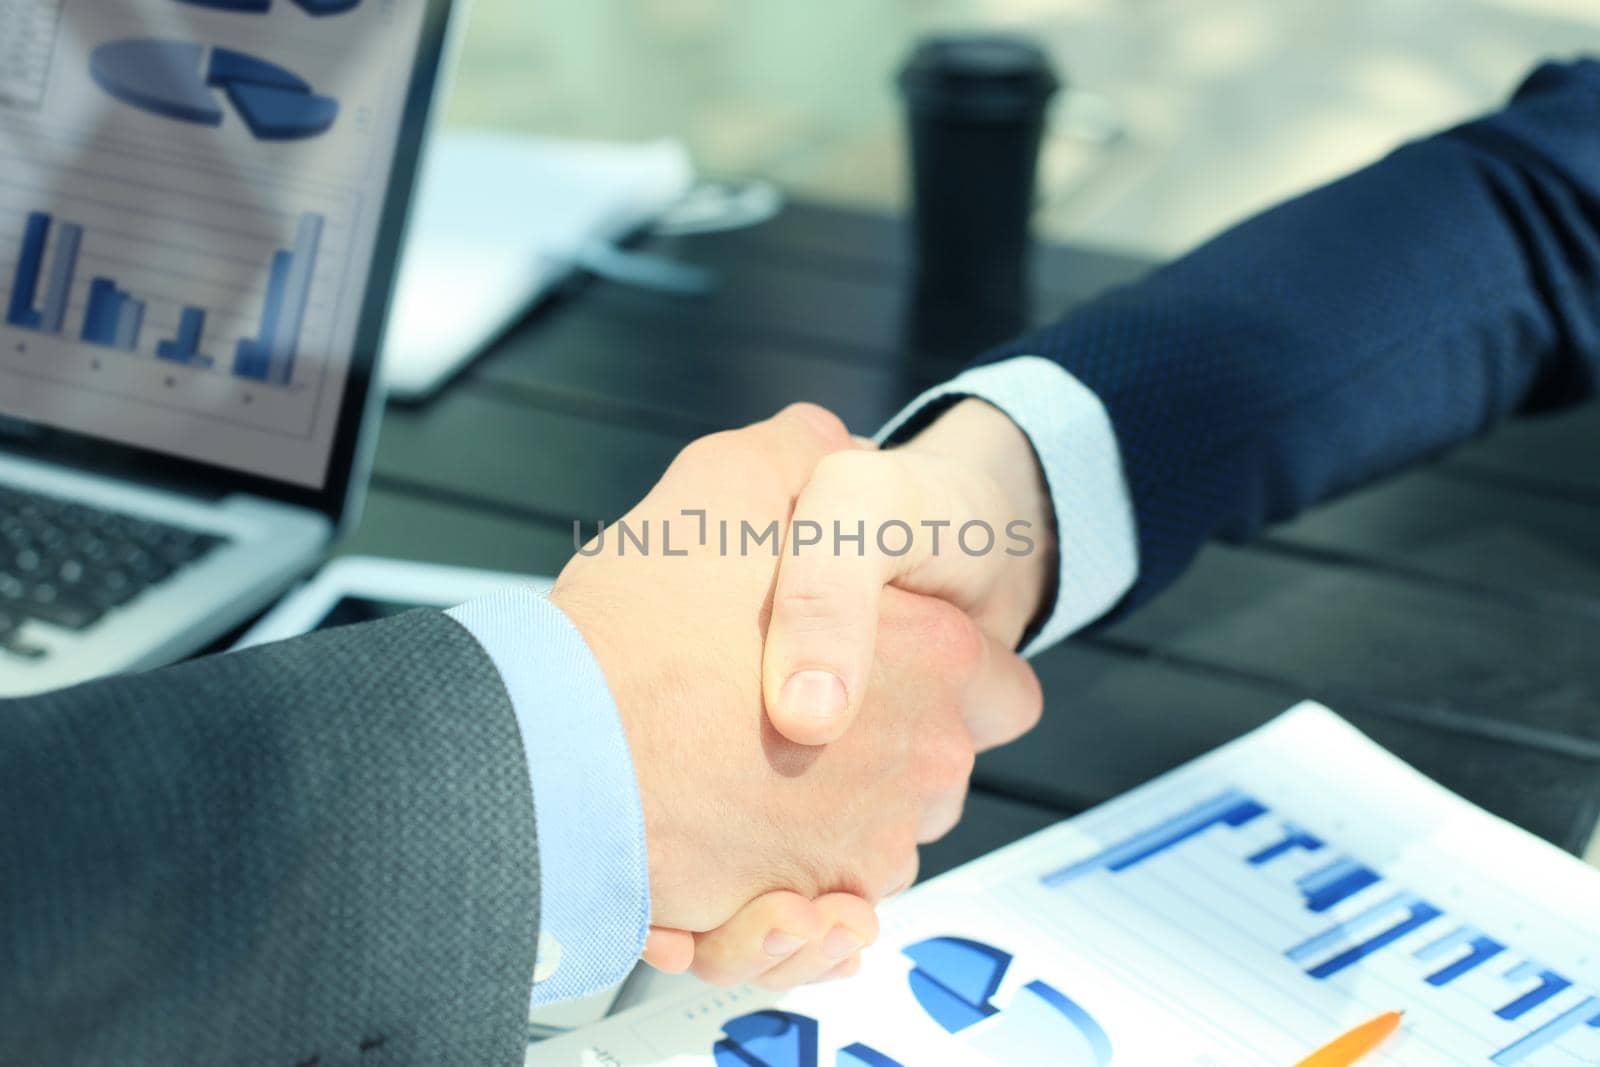 Business people shaking hands, finishing up a meeting by tsyhun